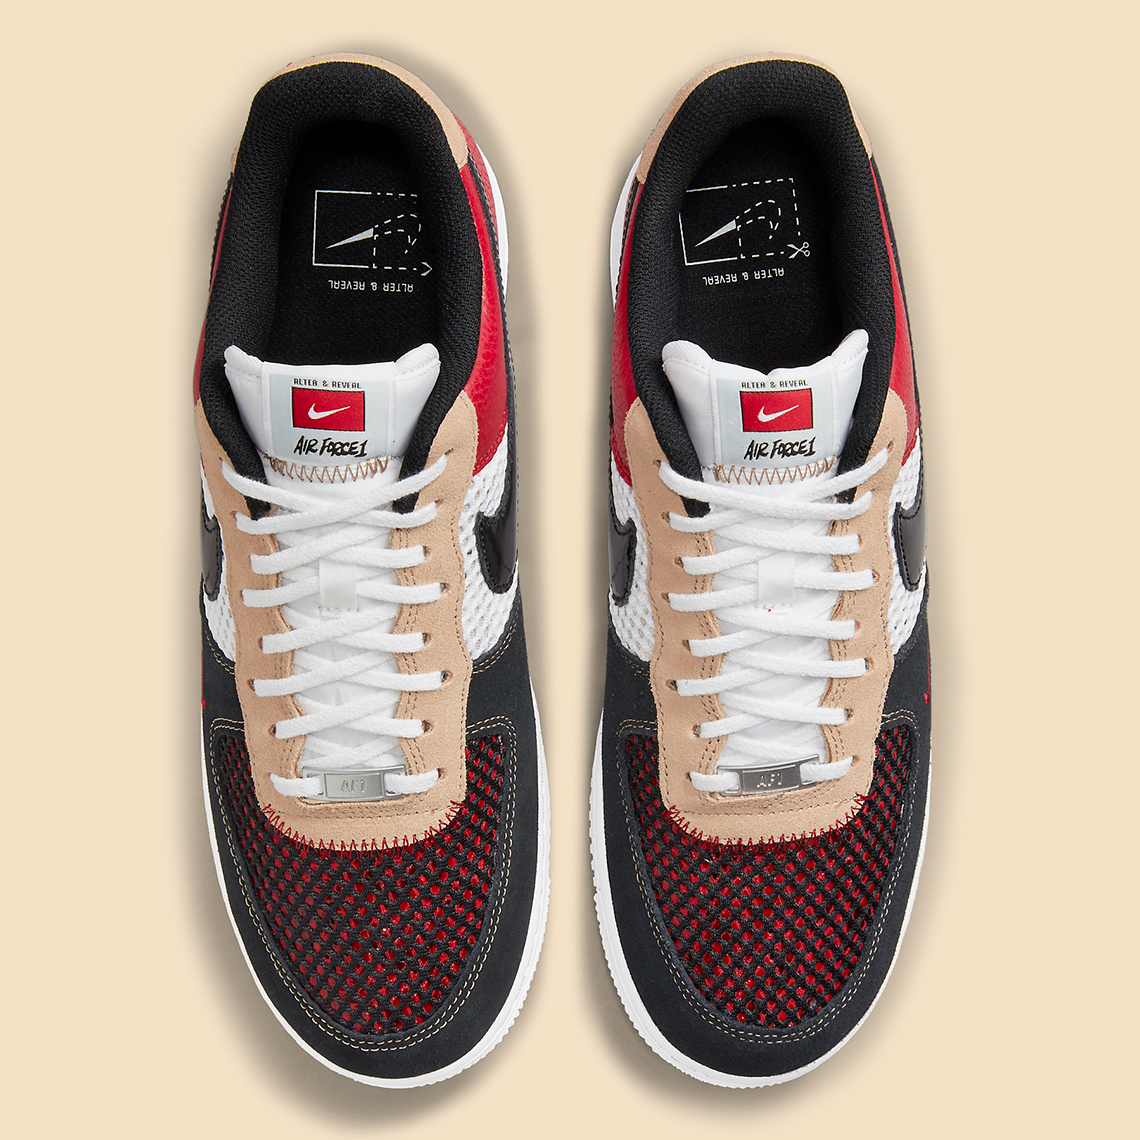 Nike Air Force 1 '07 LV8 'Alter & Reveal' | Red | Men's Size 8